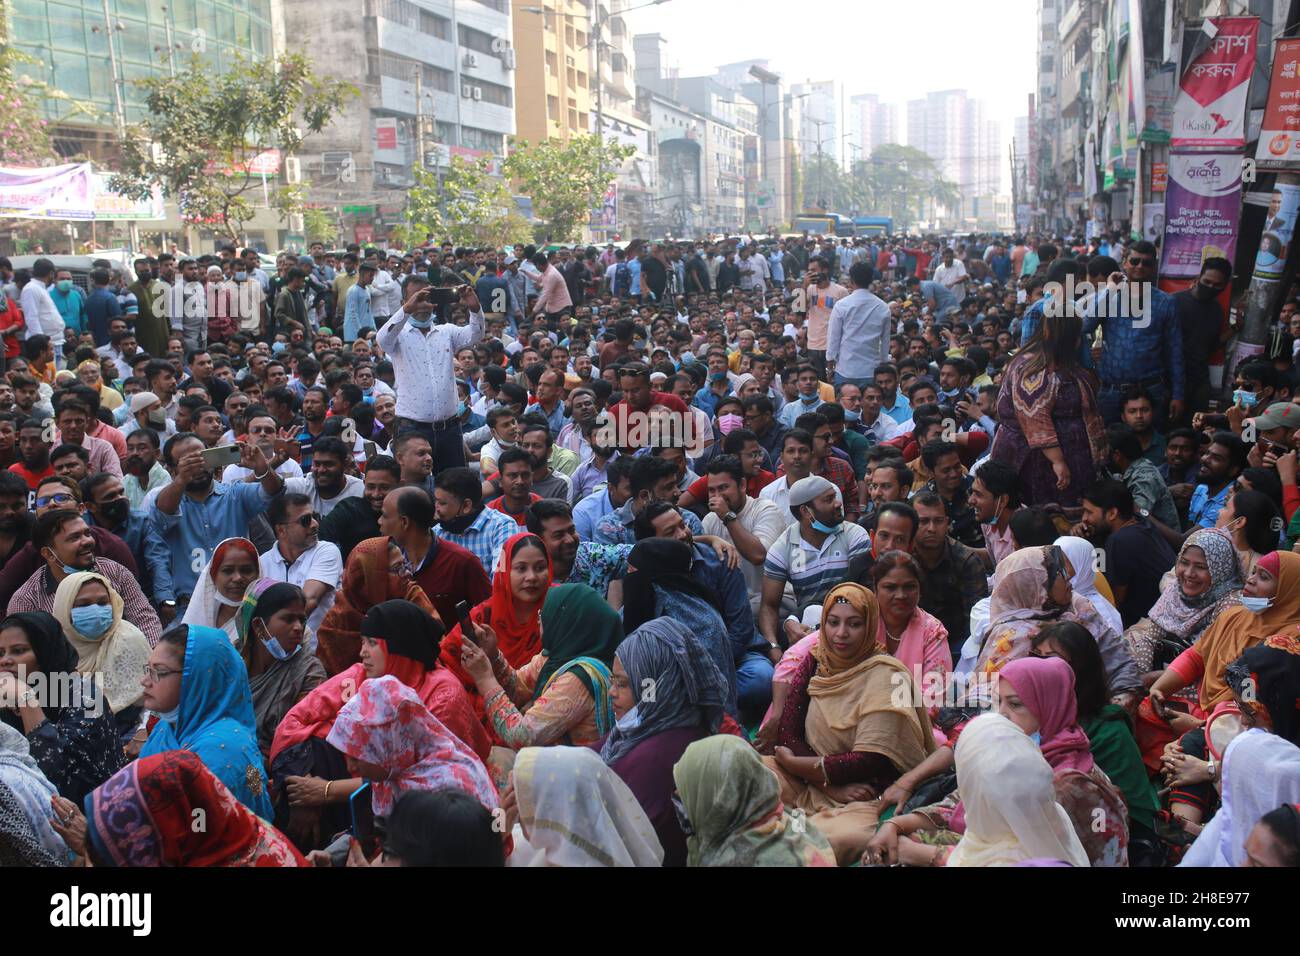 Activists of the Bangladesh Nationalist Party (BNP) sit on road during Bangladesh Nationalist Party’s protest rally demanding the government to allow party's chairperson Begum Khaleda Zia to be allowed international travel for better health treatment in Dhaka, Bangladesh. Stock Photo